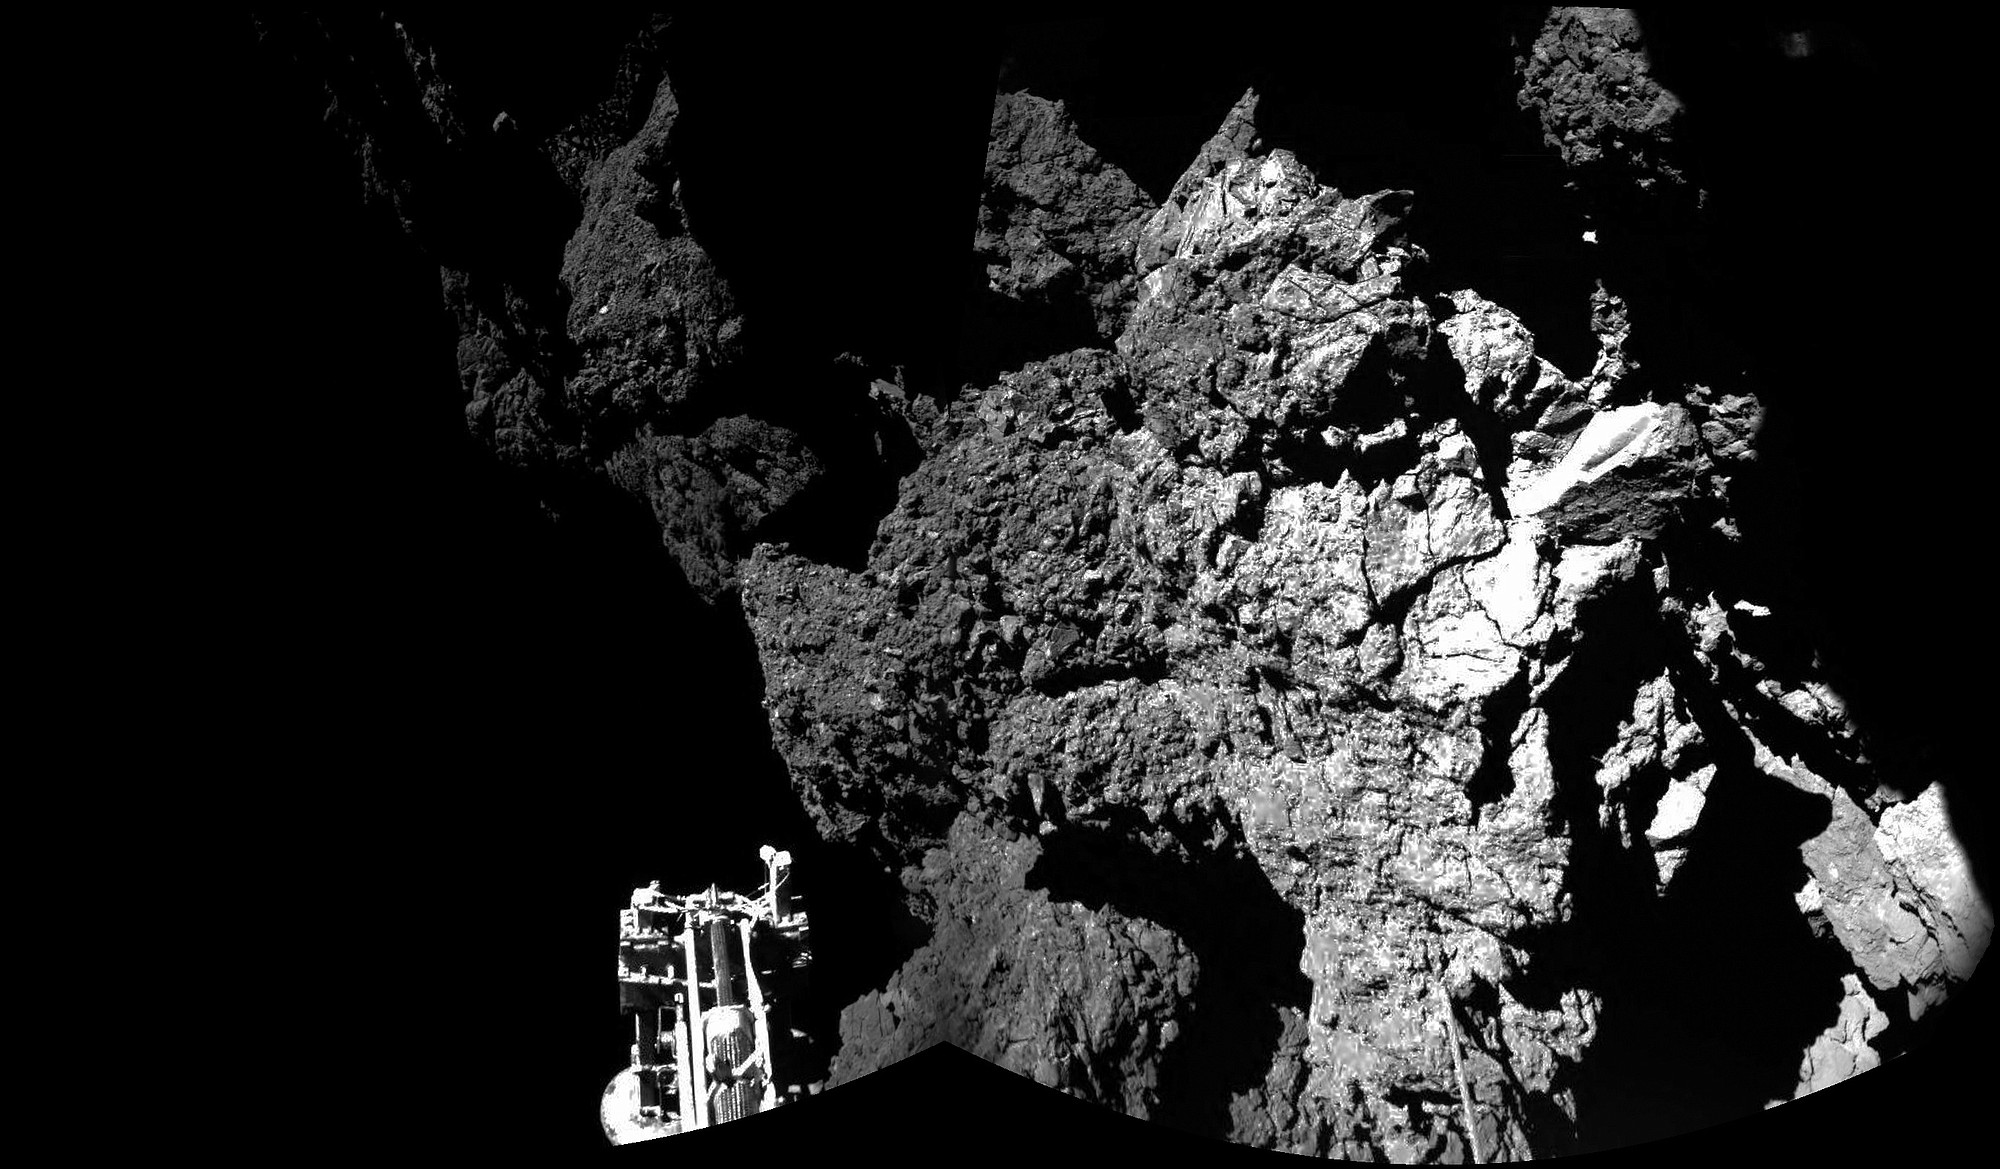 The combination photo of different images taken with Philae's CIVA camera system released by the European Space Agency shows Rosetta's lander Philae as it is safely on the surface of Comet 67P/Churyumov-Gerasimenko.